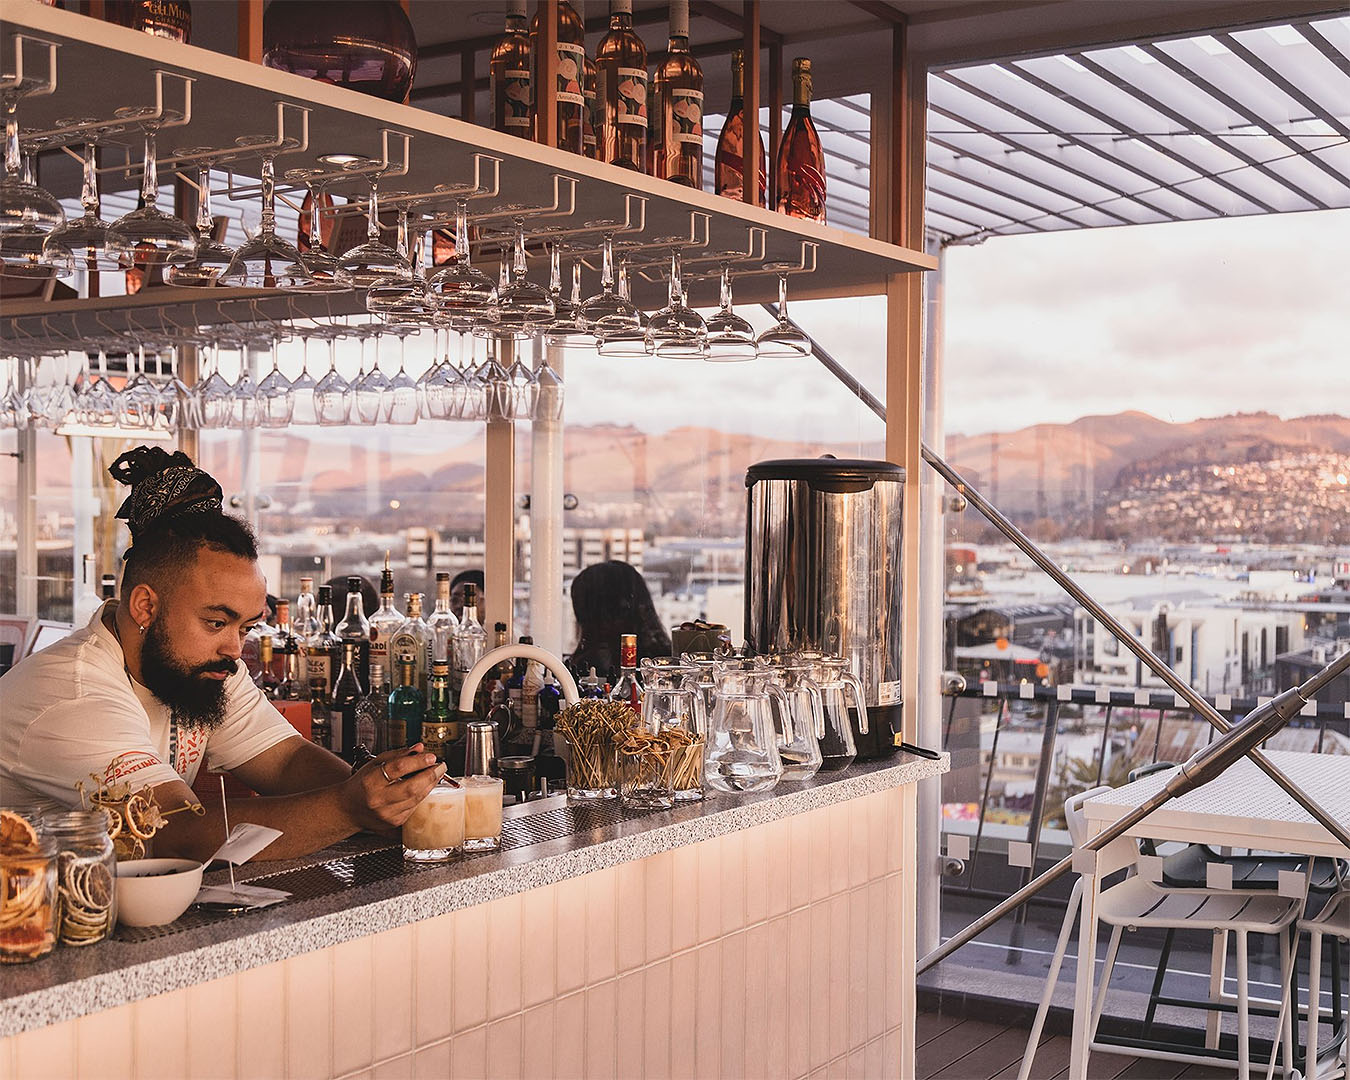 A bartender makes drinks at Pink Lady, a new rooftop bar in Christchurch.